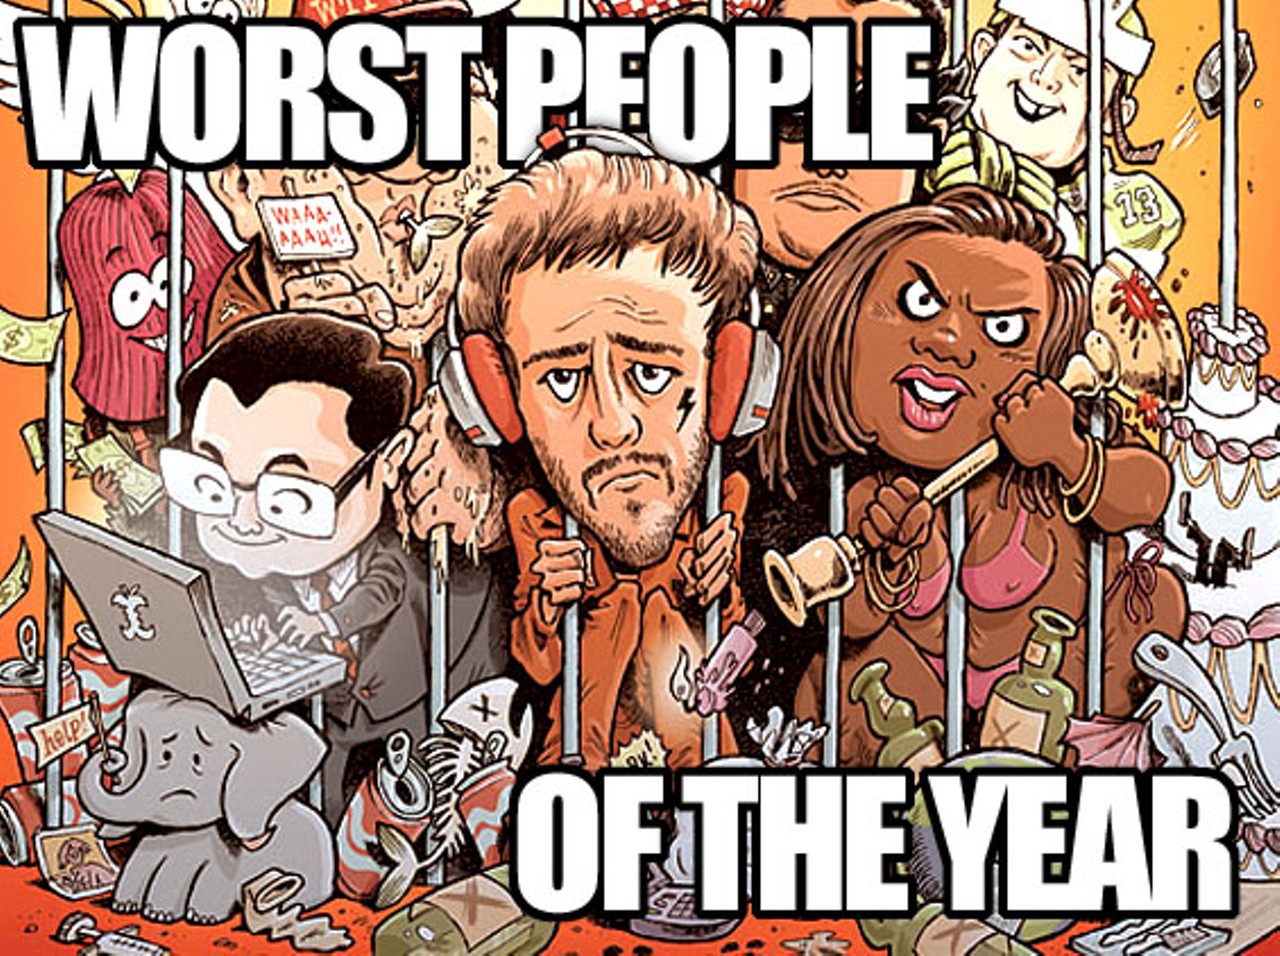 The 20 Worst People of 2013